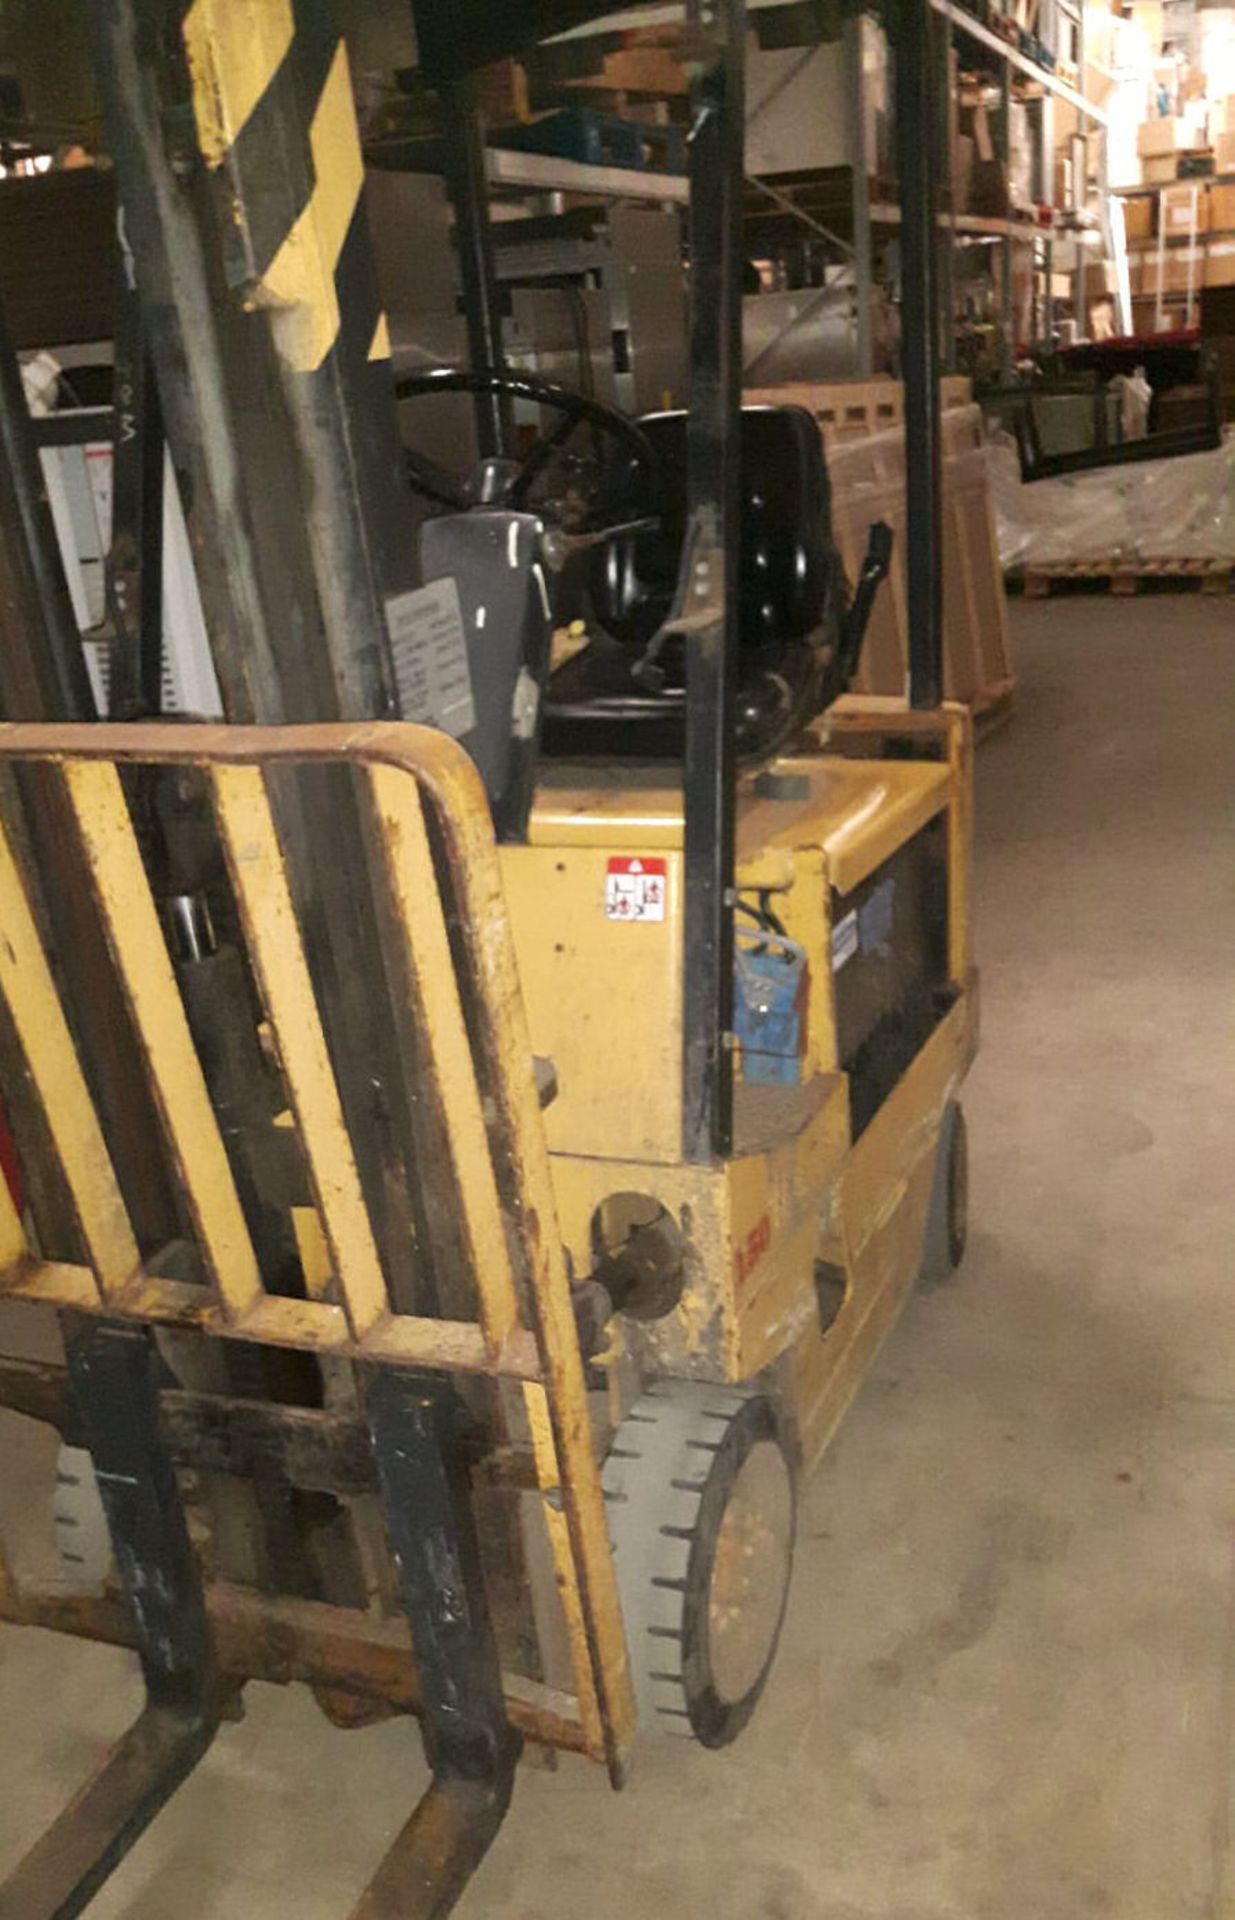 1988 Hyster 1200Kg Electric Counterbalance Forklift Truck - 1451 Hours - PLEASE READ DESCRIPTION - - Image 10 of 28